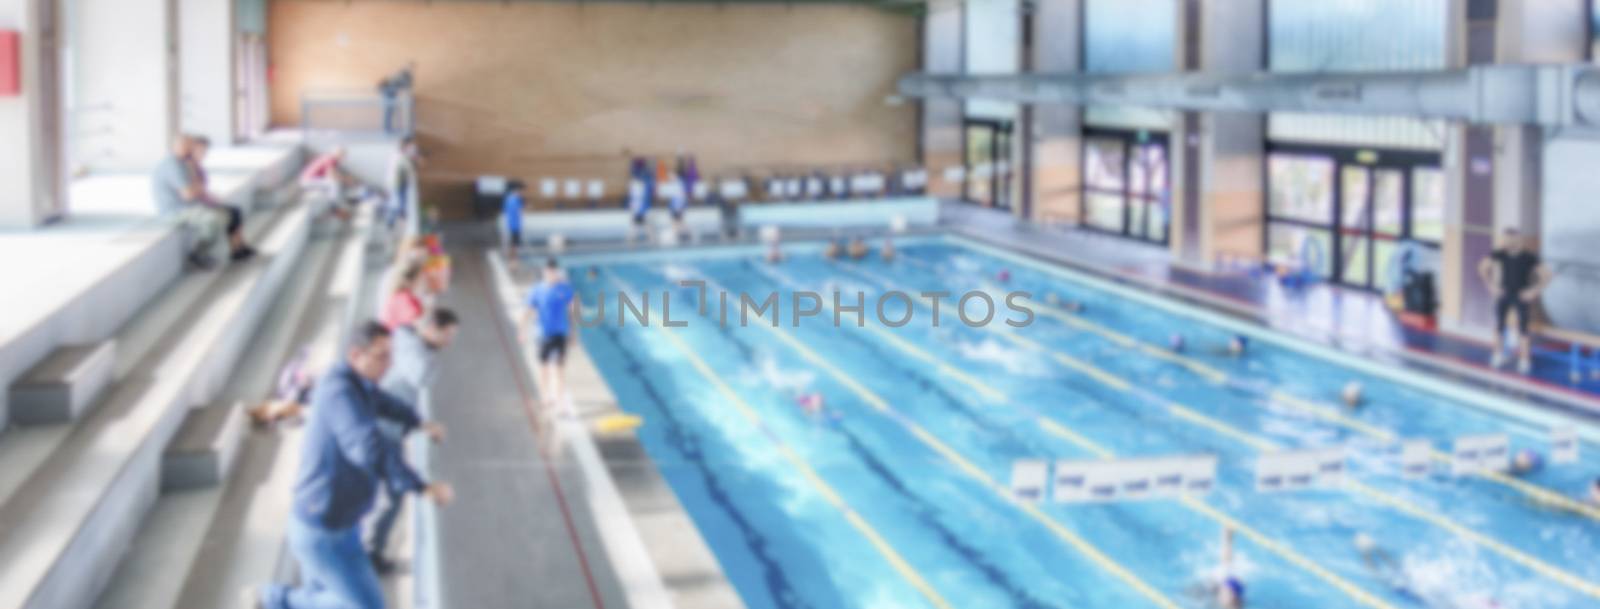 Defocused background with aerial view of a swimming pool indoor. Intentionally blurred post production for bokeh effect